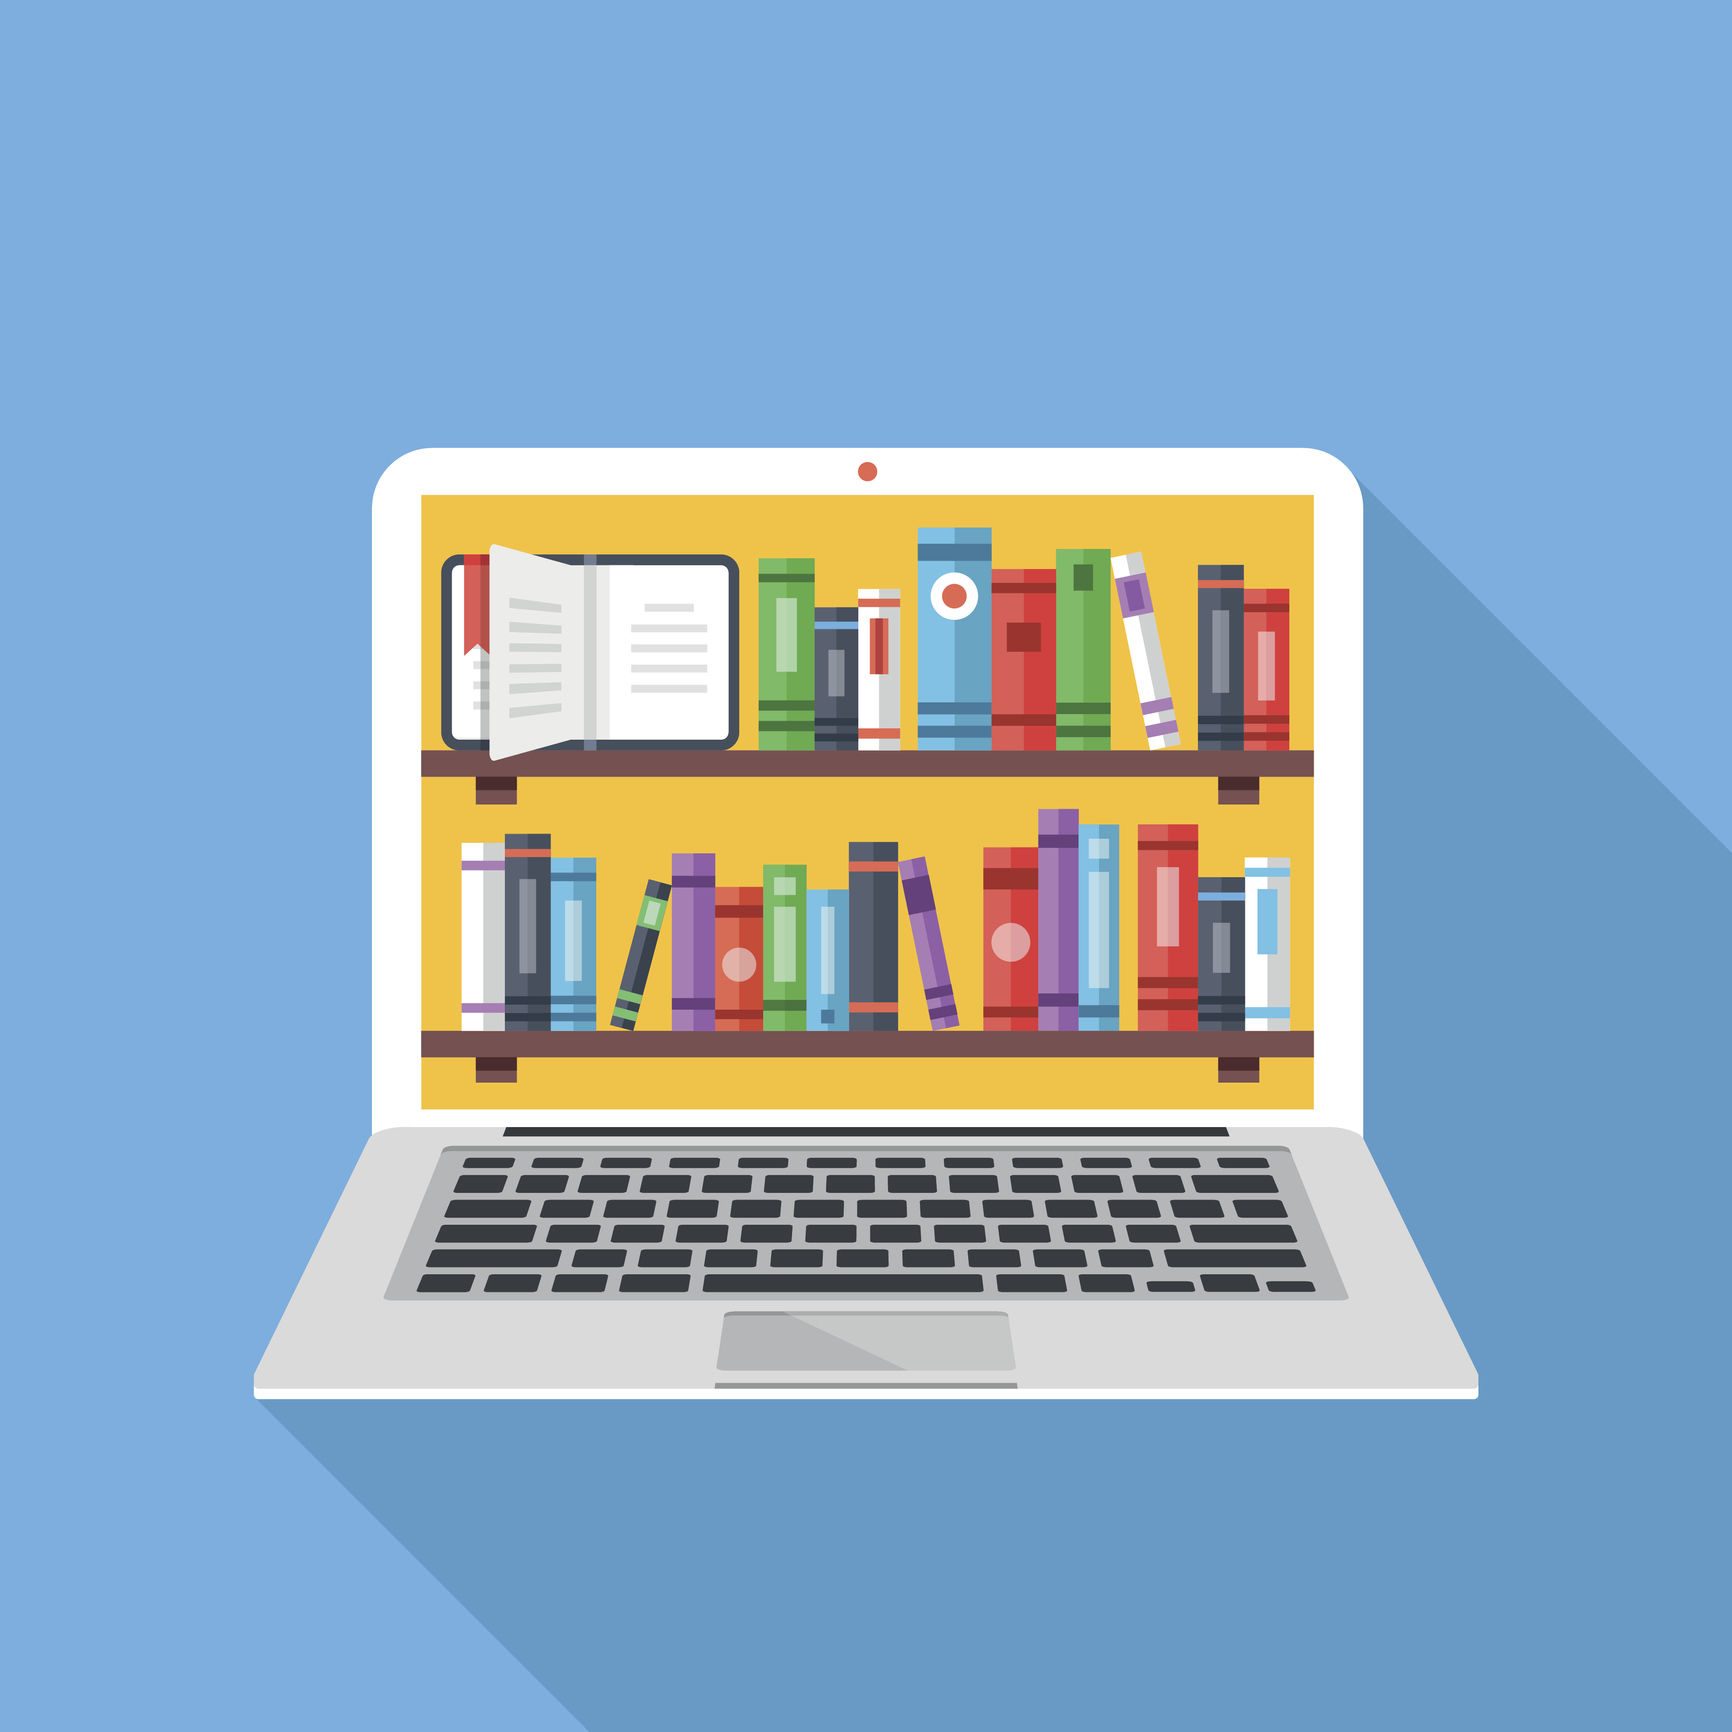 Bookshelves with books on laptop screen. Online digital library. Modern concepts for web sites, web banners, printed materials. Creative flat design vector illustration